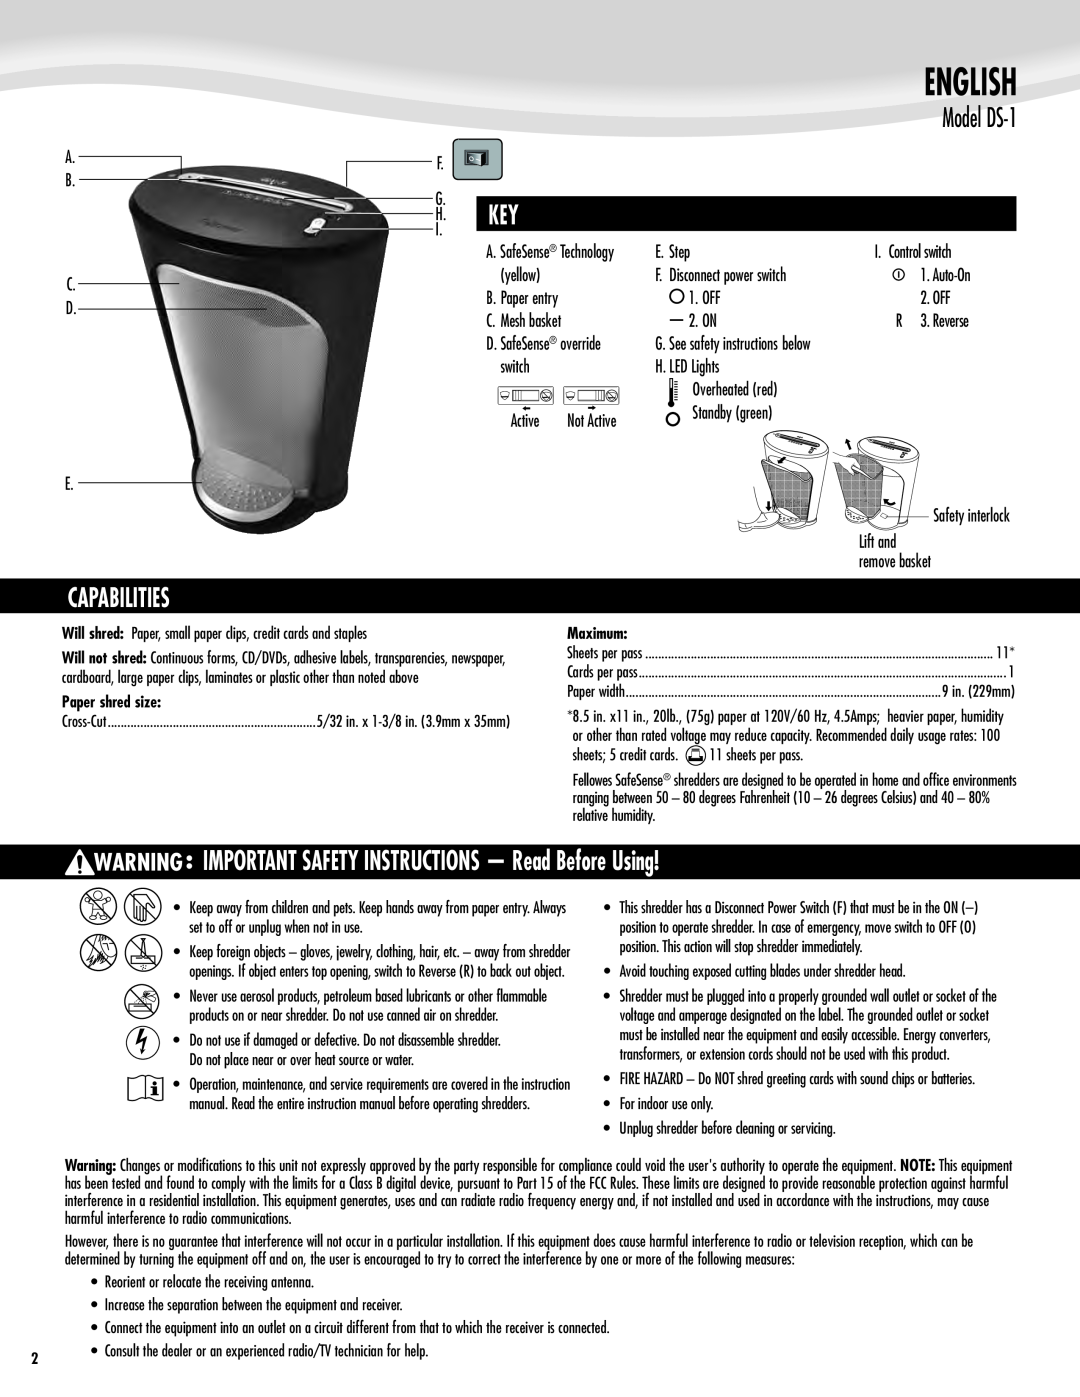 Fellowes manual Model DS-1, Capabilities, IMPORTANT SAFETY INSTRUCTIONS - Read Before Using, English 